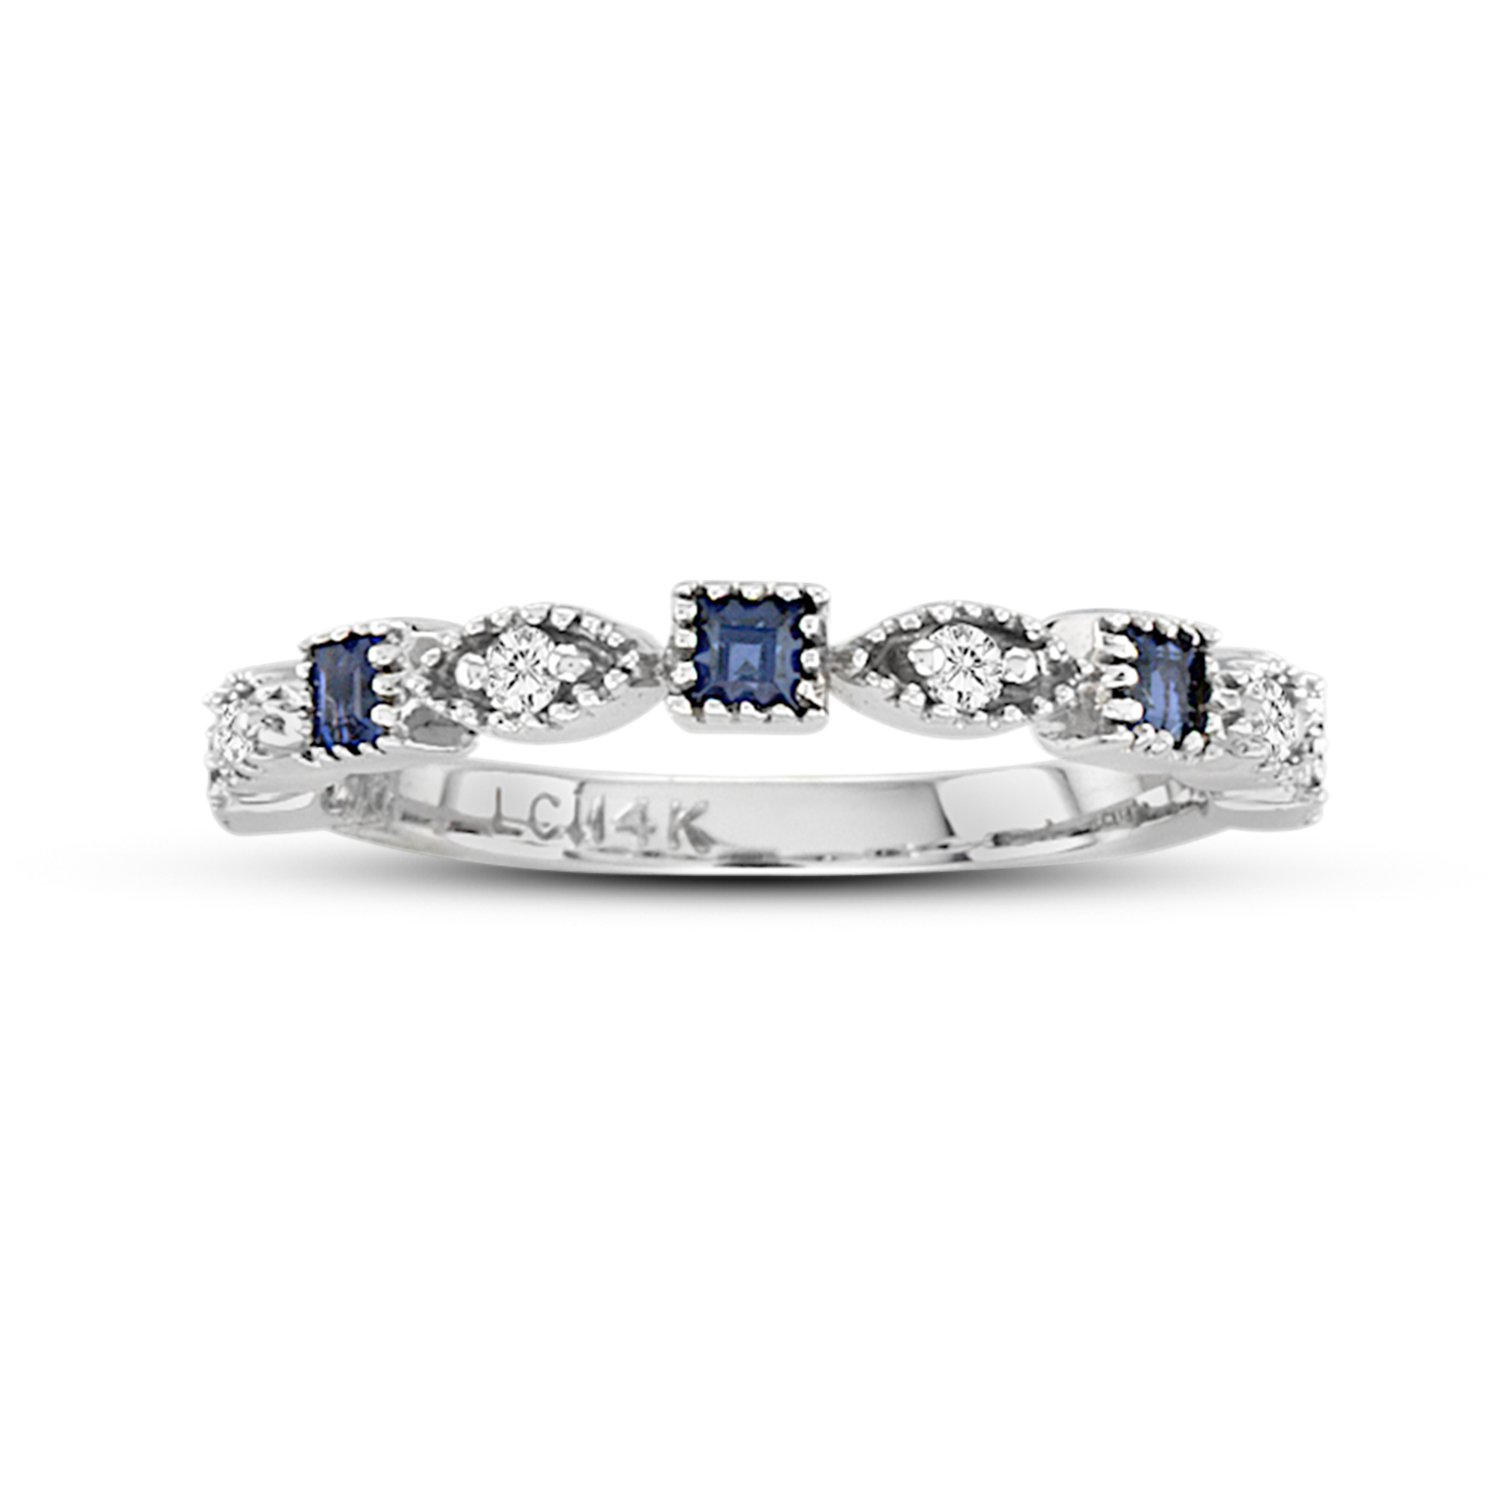 View 0.08ctw Diamond and Sapphire Band in 14k Gold